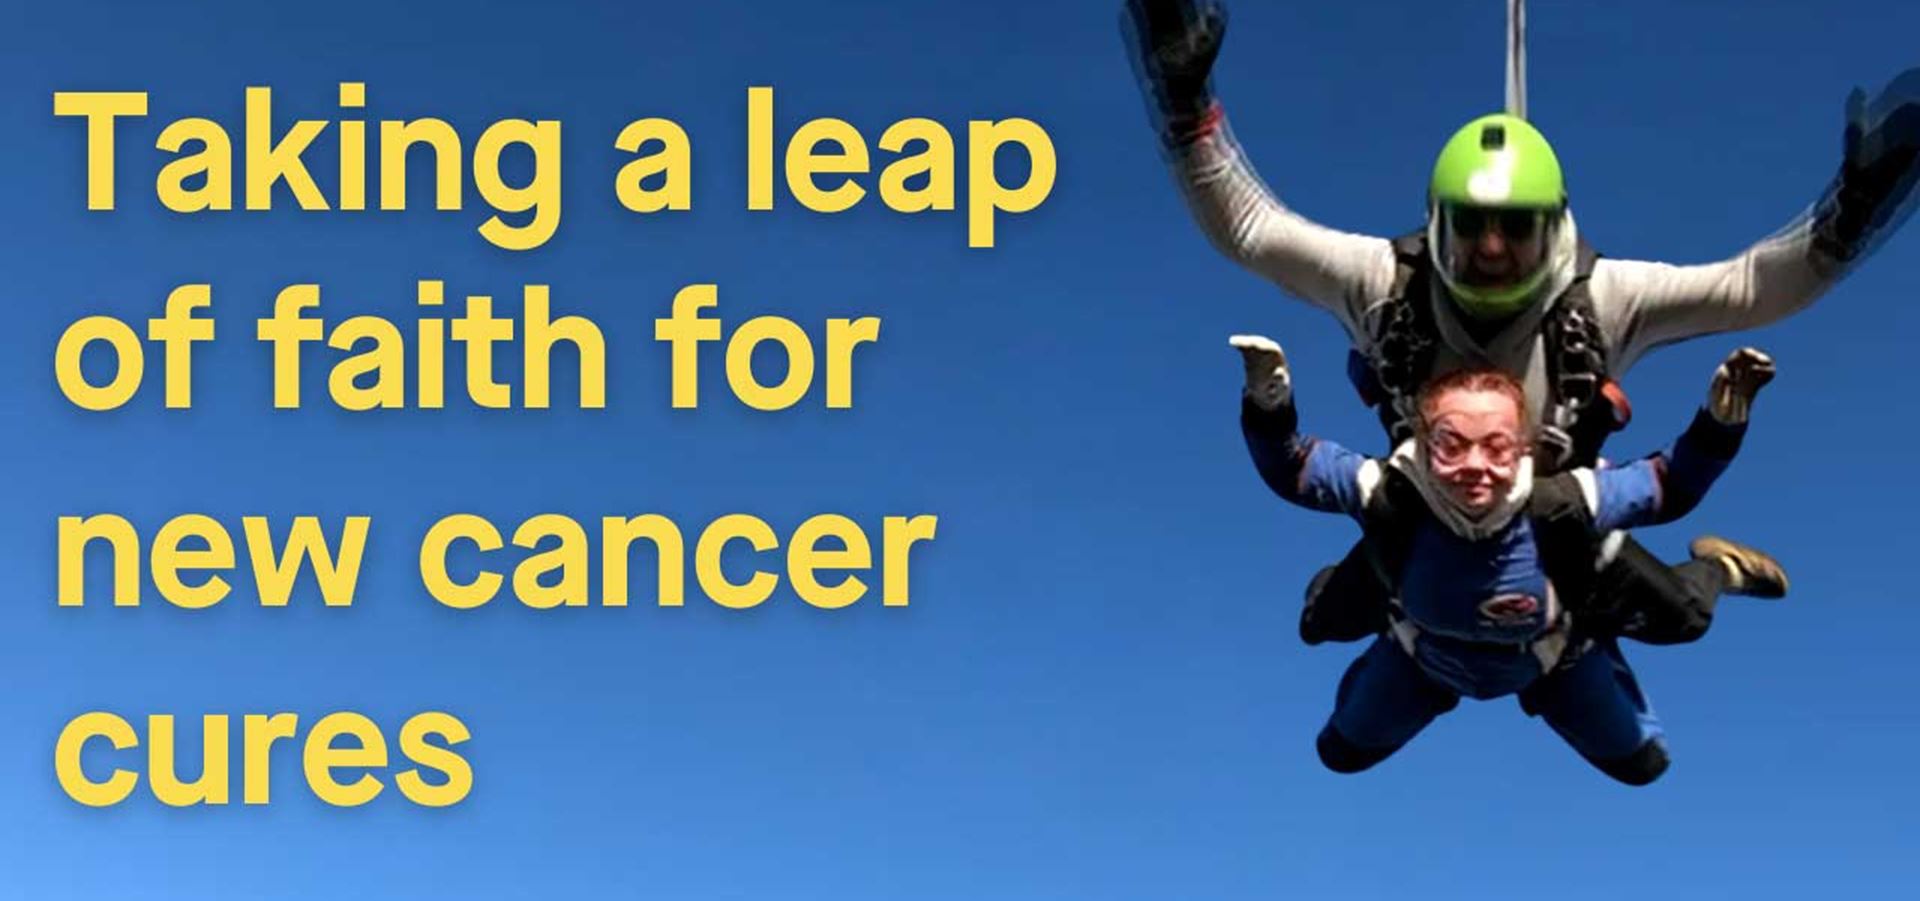 Taking a leap of faith for new cancer cures